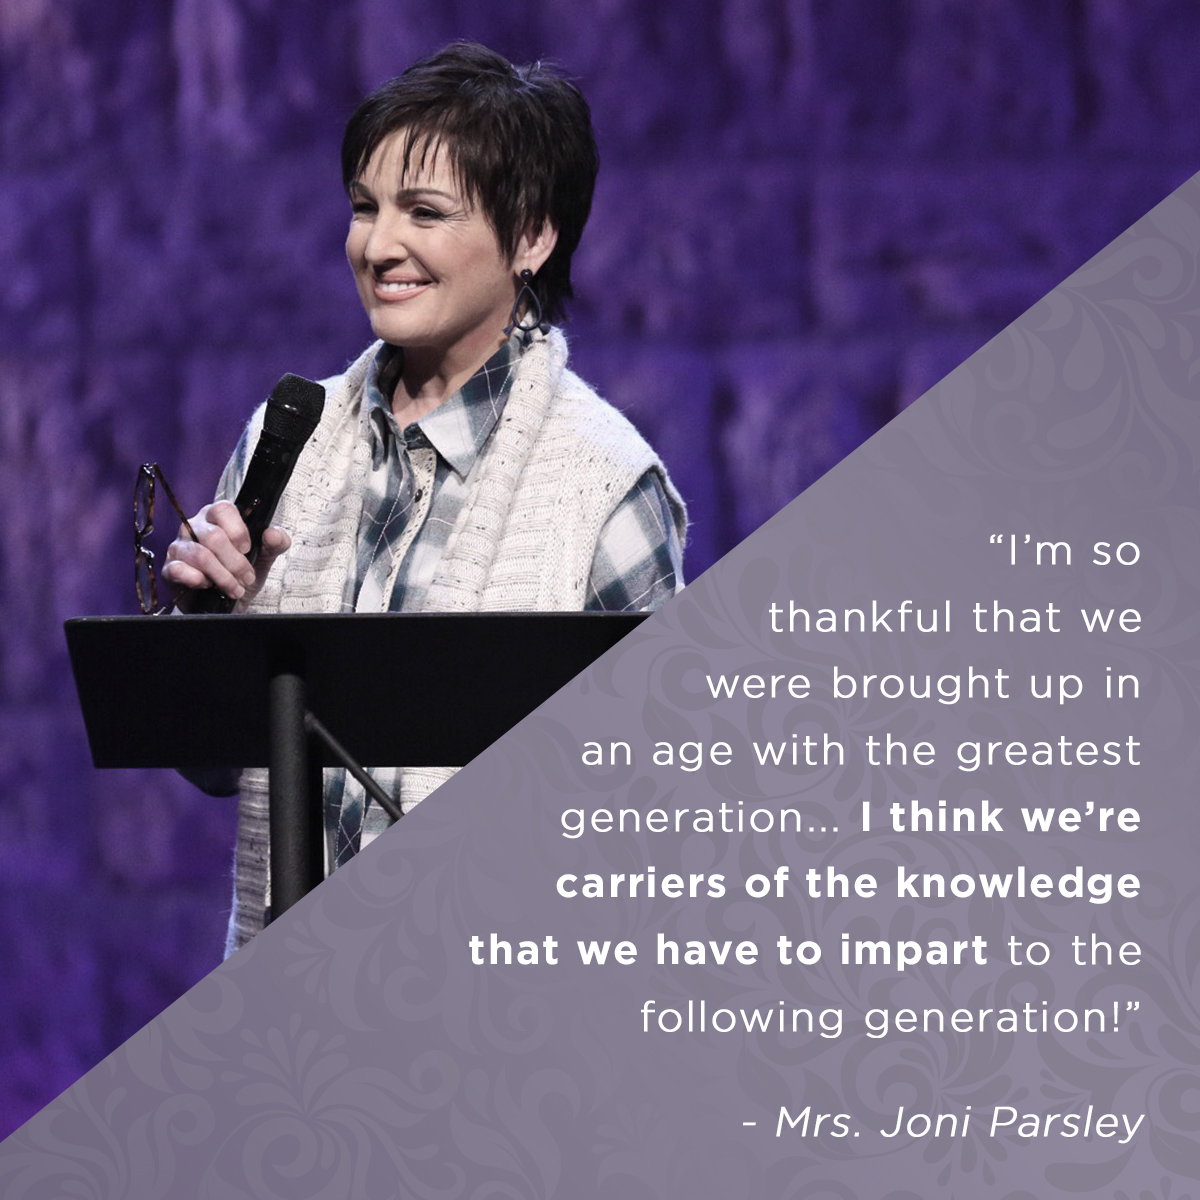 “I’m so grateful we were brought up in the age with the greatest generation... I think we’re carriers of the knowledge we have to impart to the following generation” – Mrs. Joni Parsley